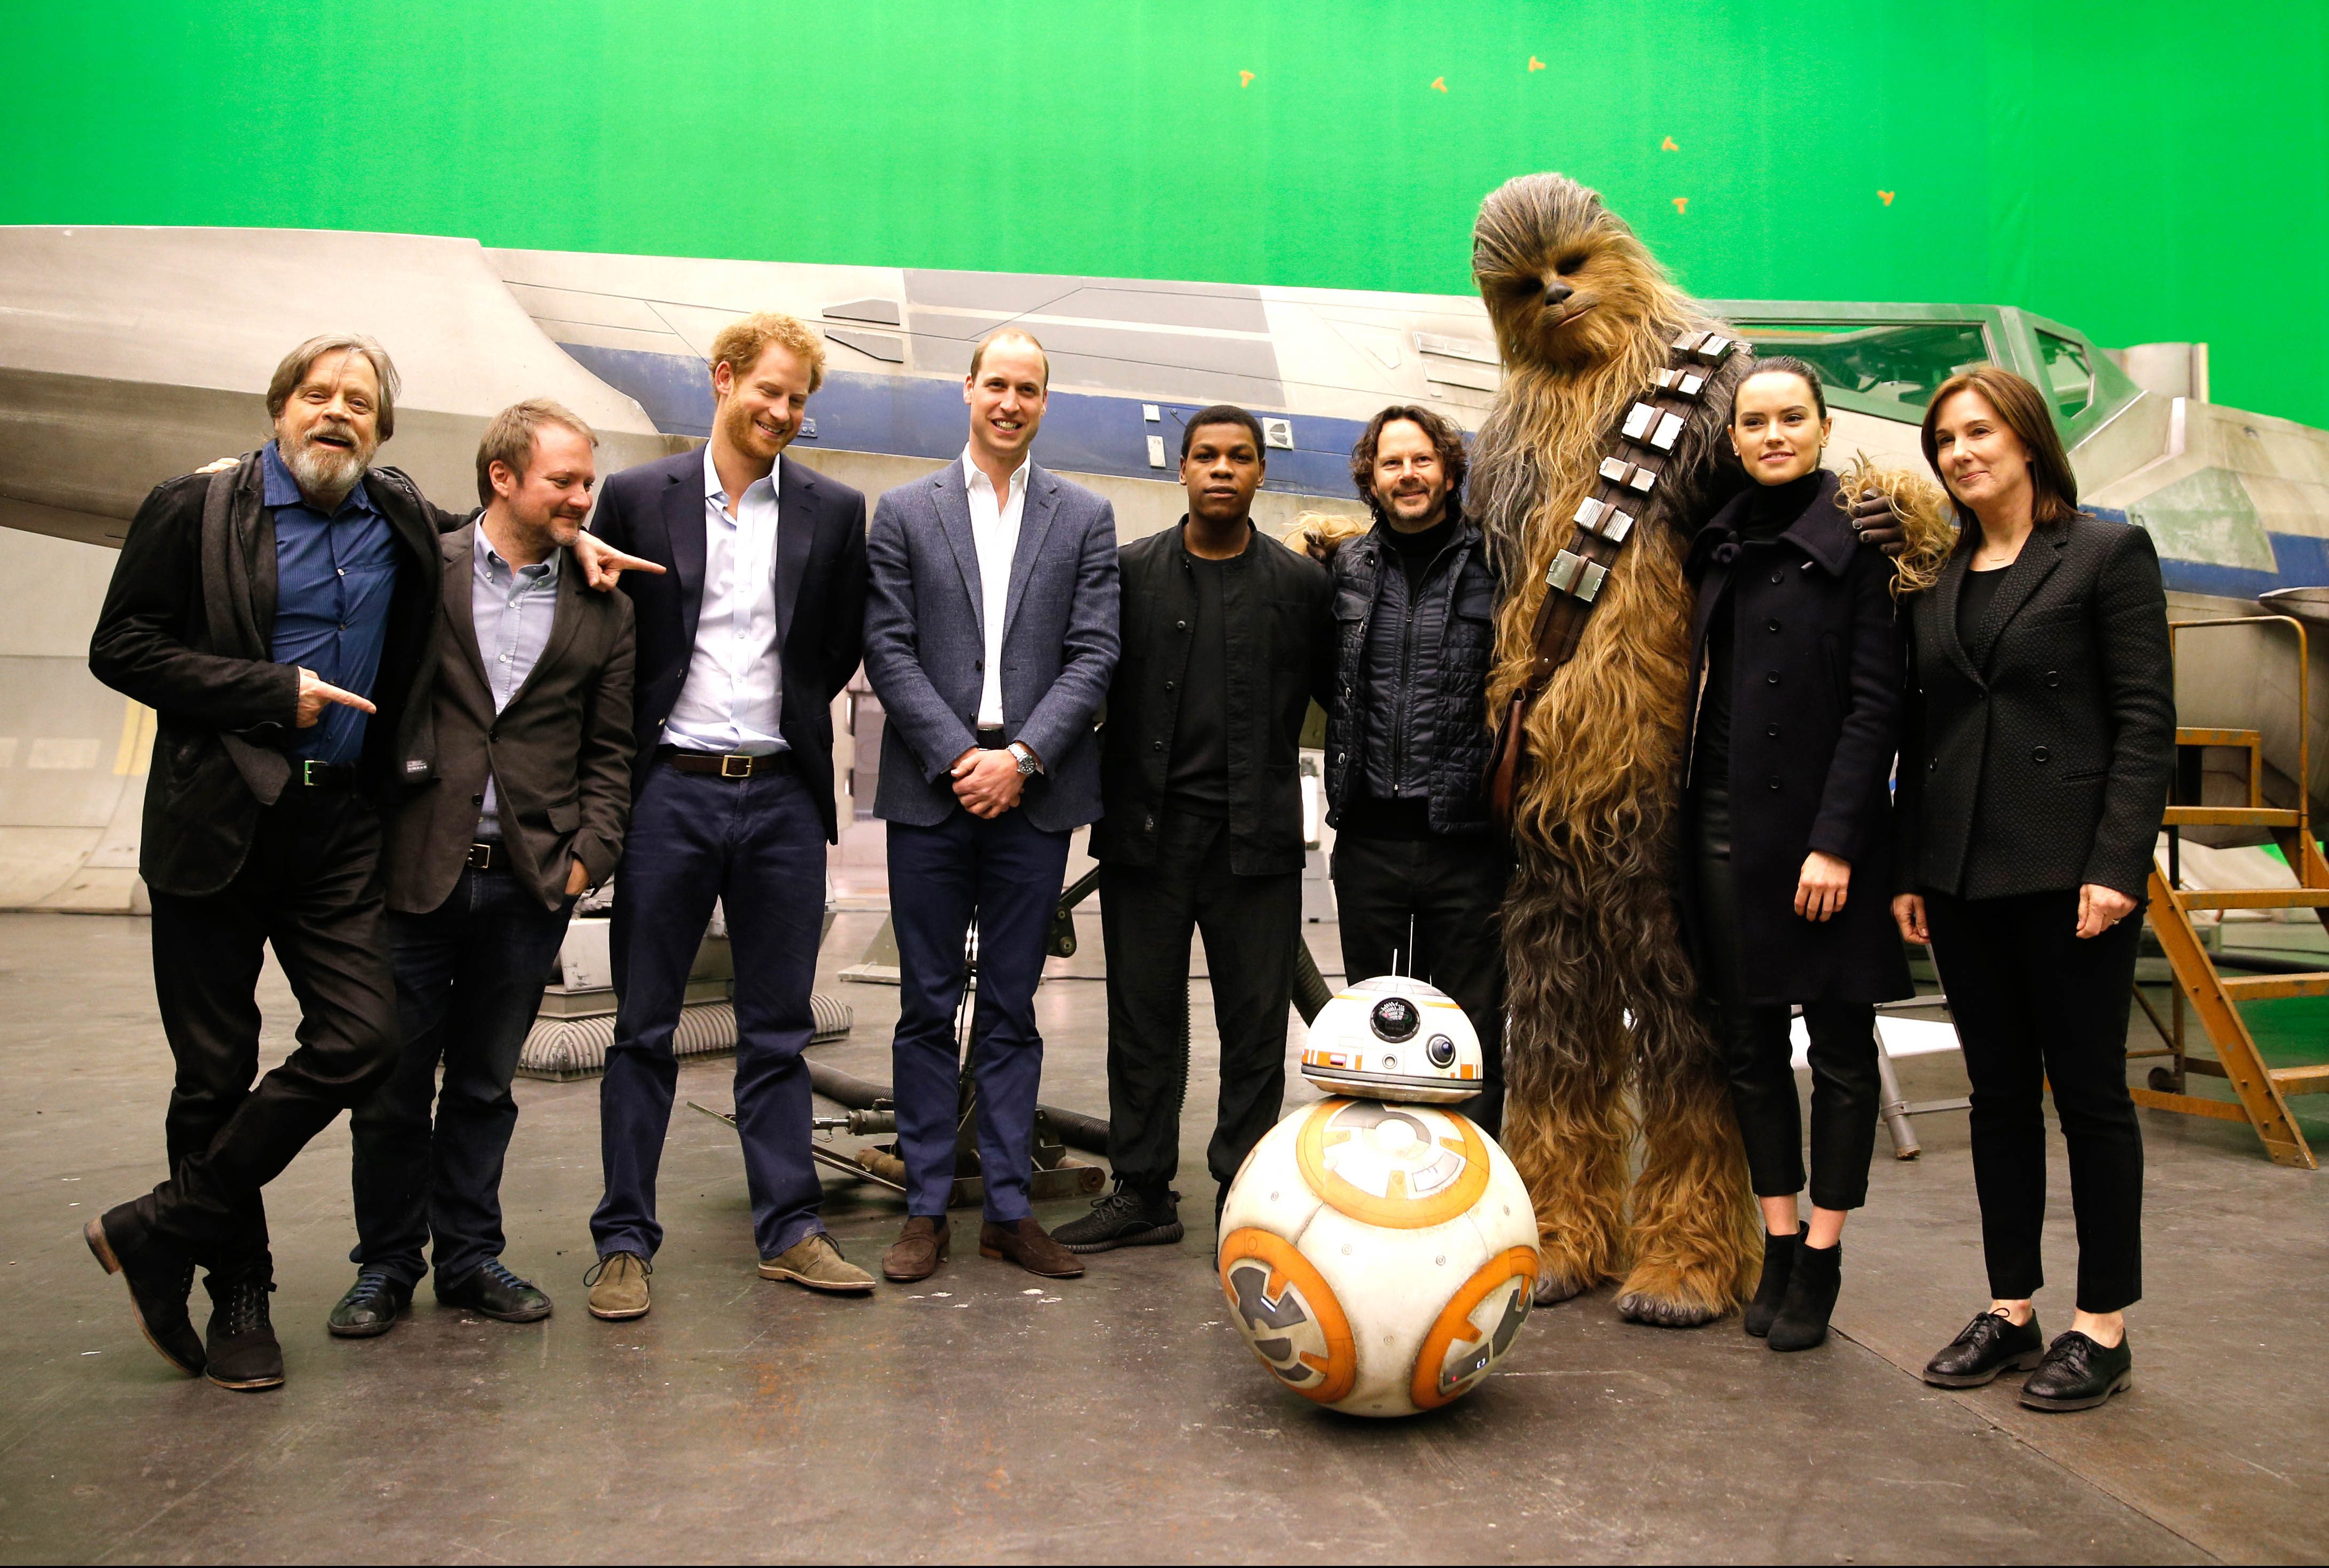 Mark Hamill, director Rian Johnson, Prince Harry, Prince William, Duke of Cambridge, John Boyega, Chewbacca and Daisy Ridley pose during a tour of the 'Star Wars' sets at Pinewood studios in Iver Heath, west of London on April 19, Thursday. Photo from EPA 